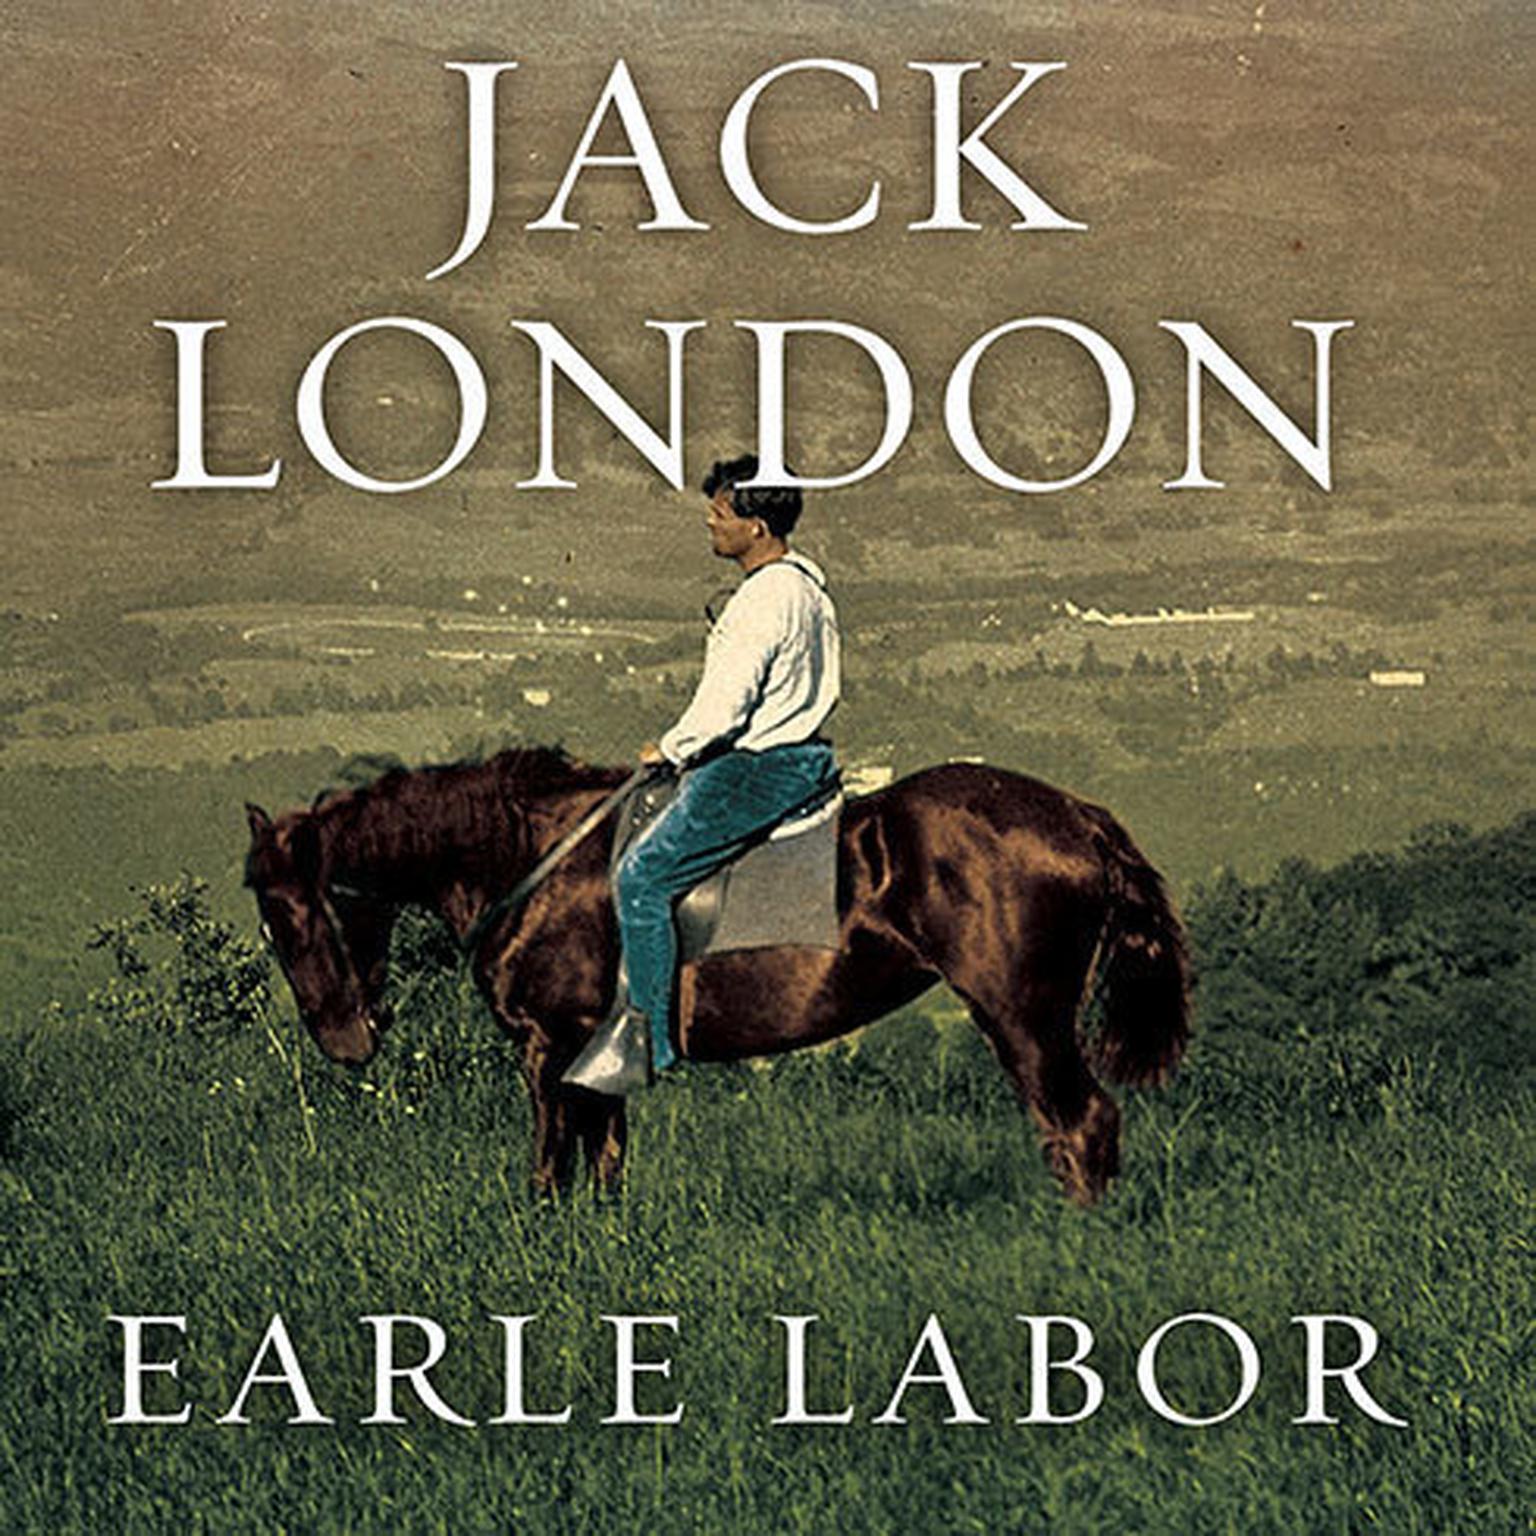 Jack London: An American Life Audiobook, by Earle Labor